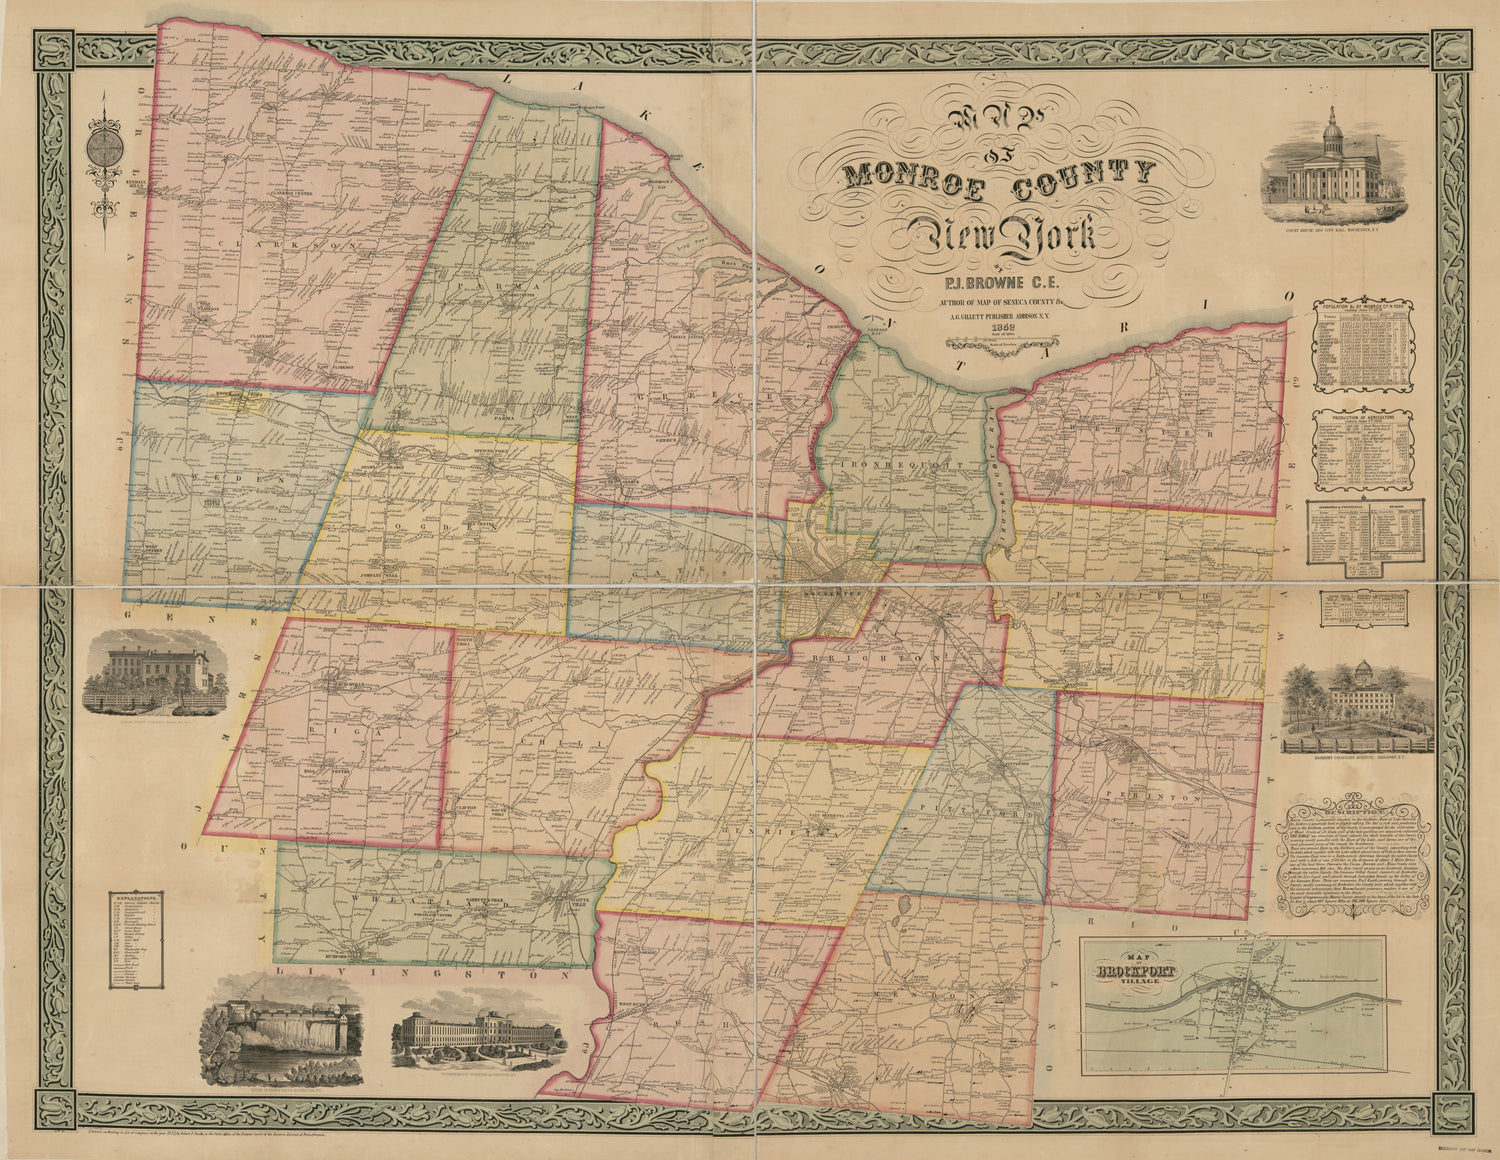 This old map of Map of Monroe County, New York from 1852 was created by P. J. Browne, A. G. Gillet, Robert Pearsall Smith in 1852